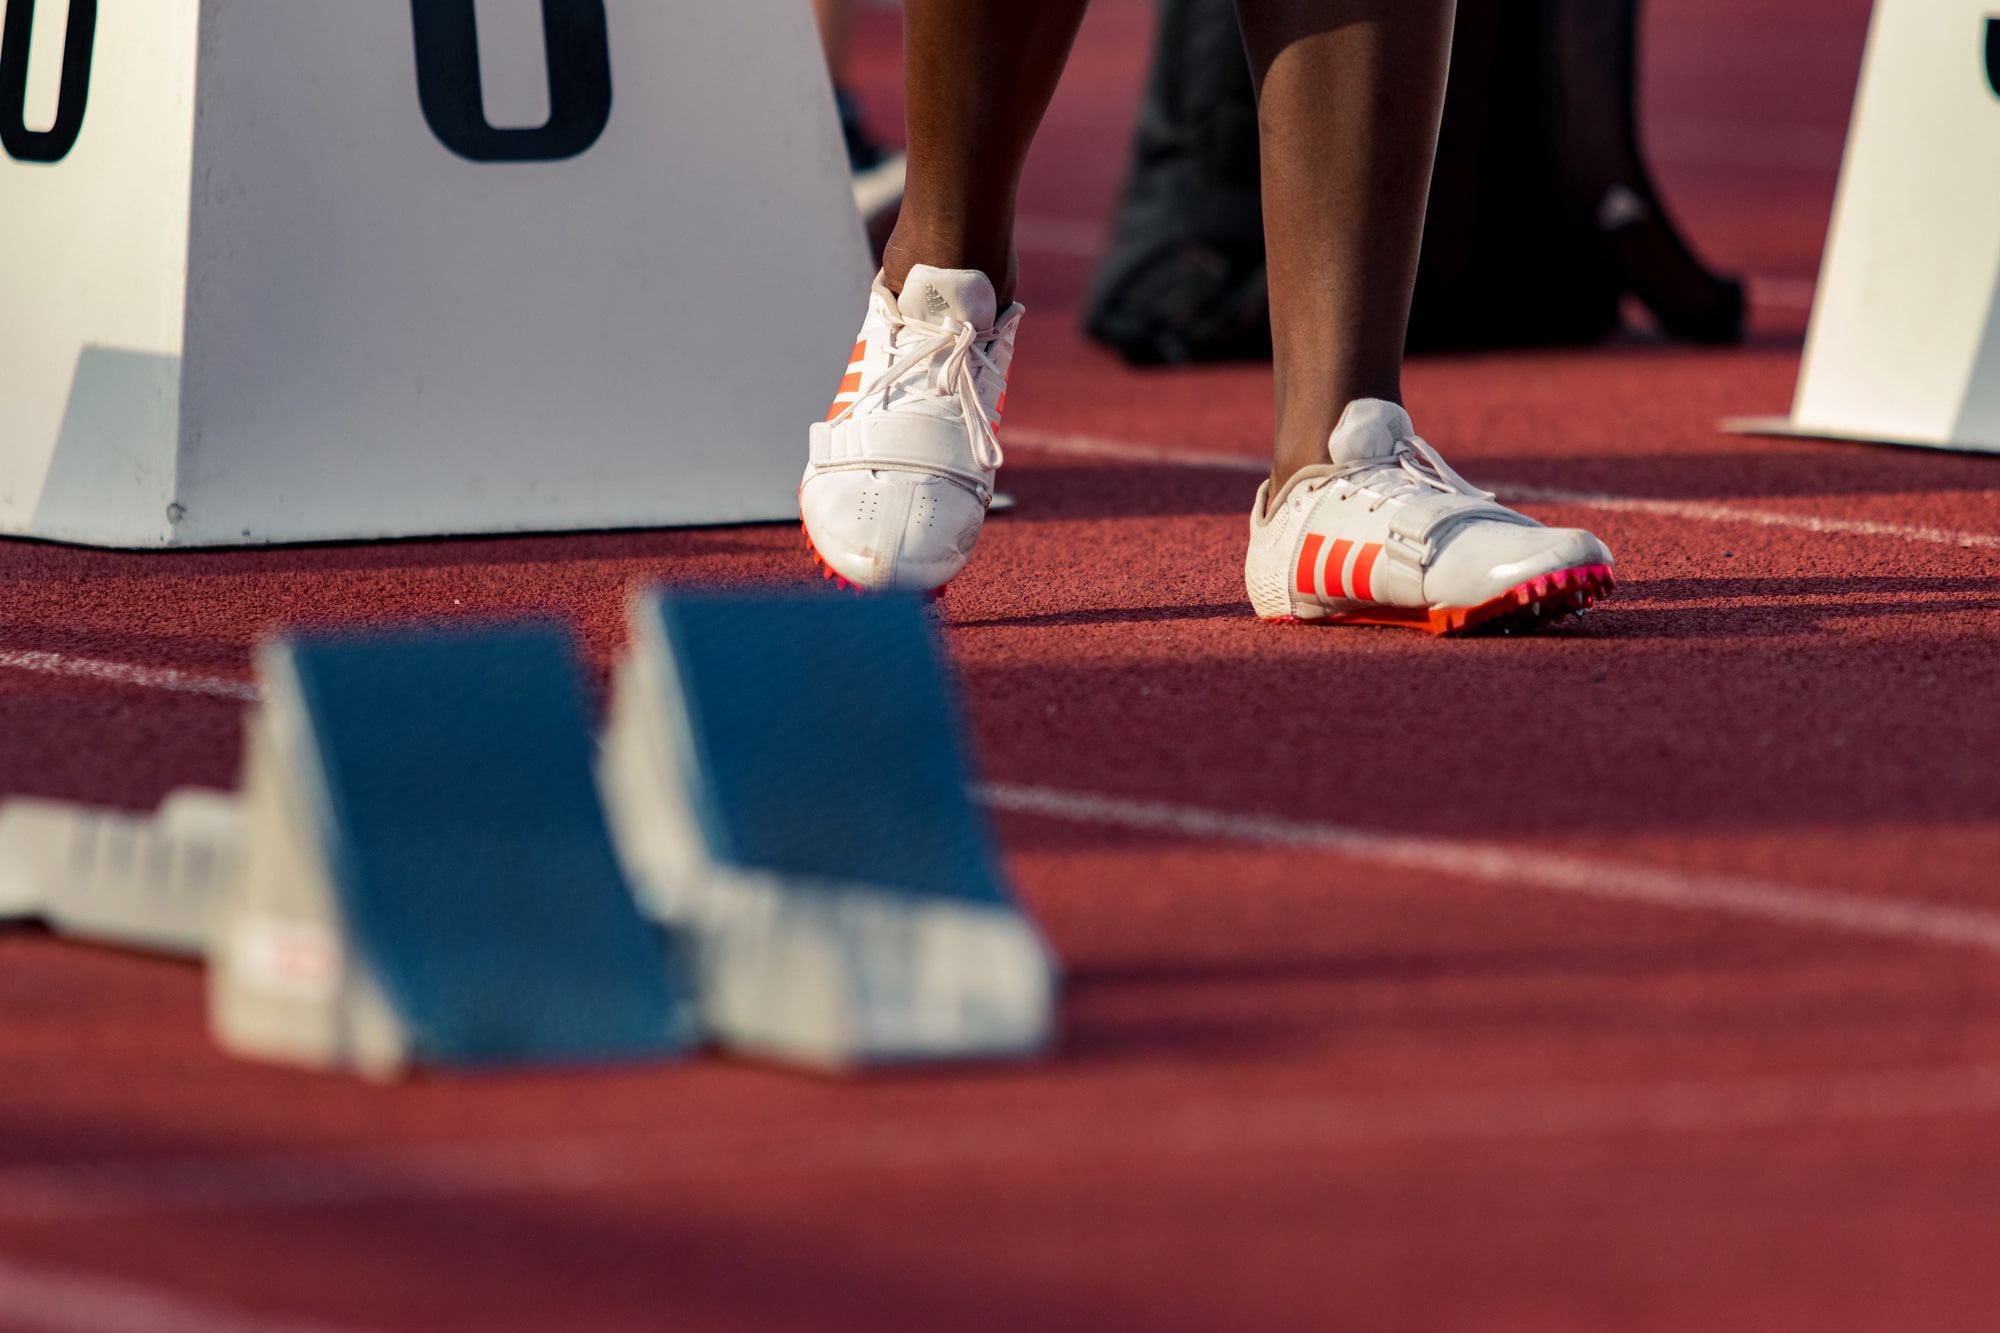 Starting blocks on track to represent how to start a web design business from scratch